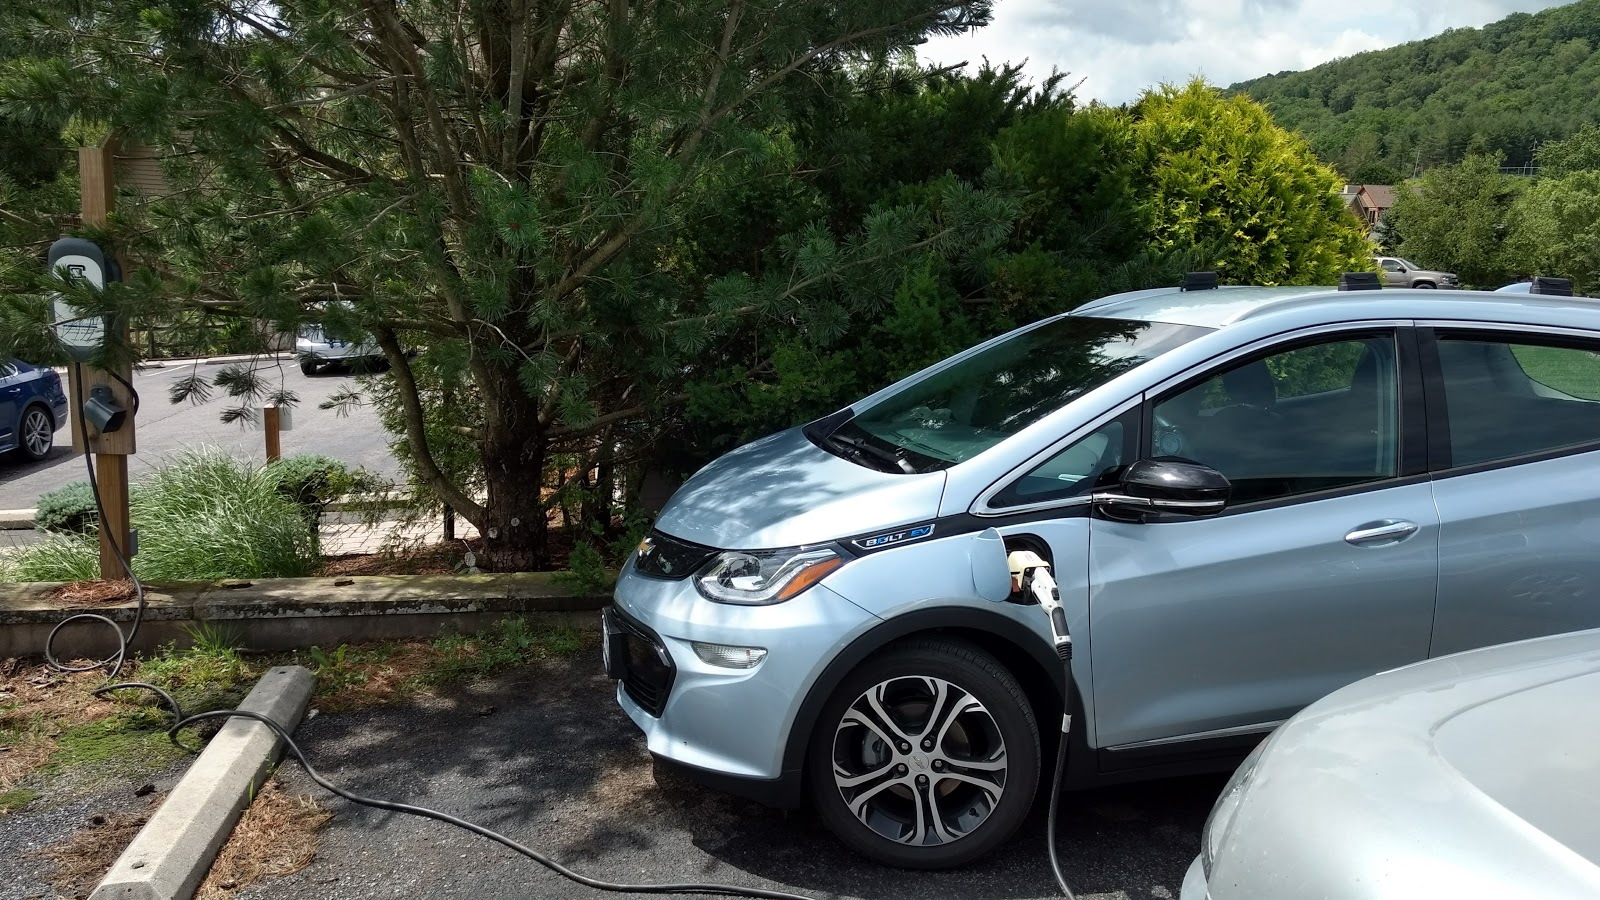  Free Level 2 charging for Chevy Bolt EV at Lake Pointe Inn, McHenry, Maryland  [image: Brian Ro]